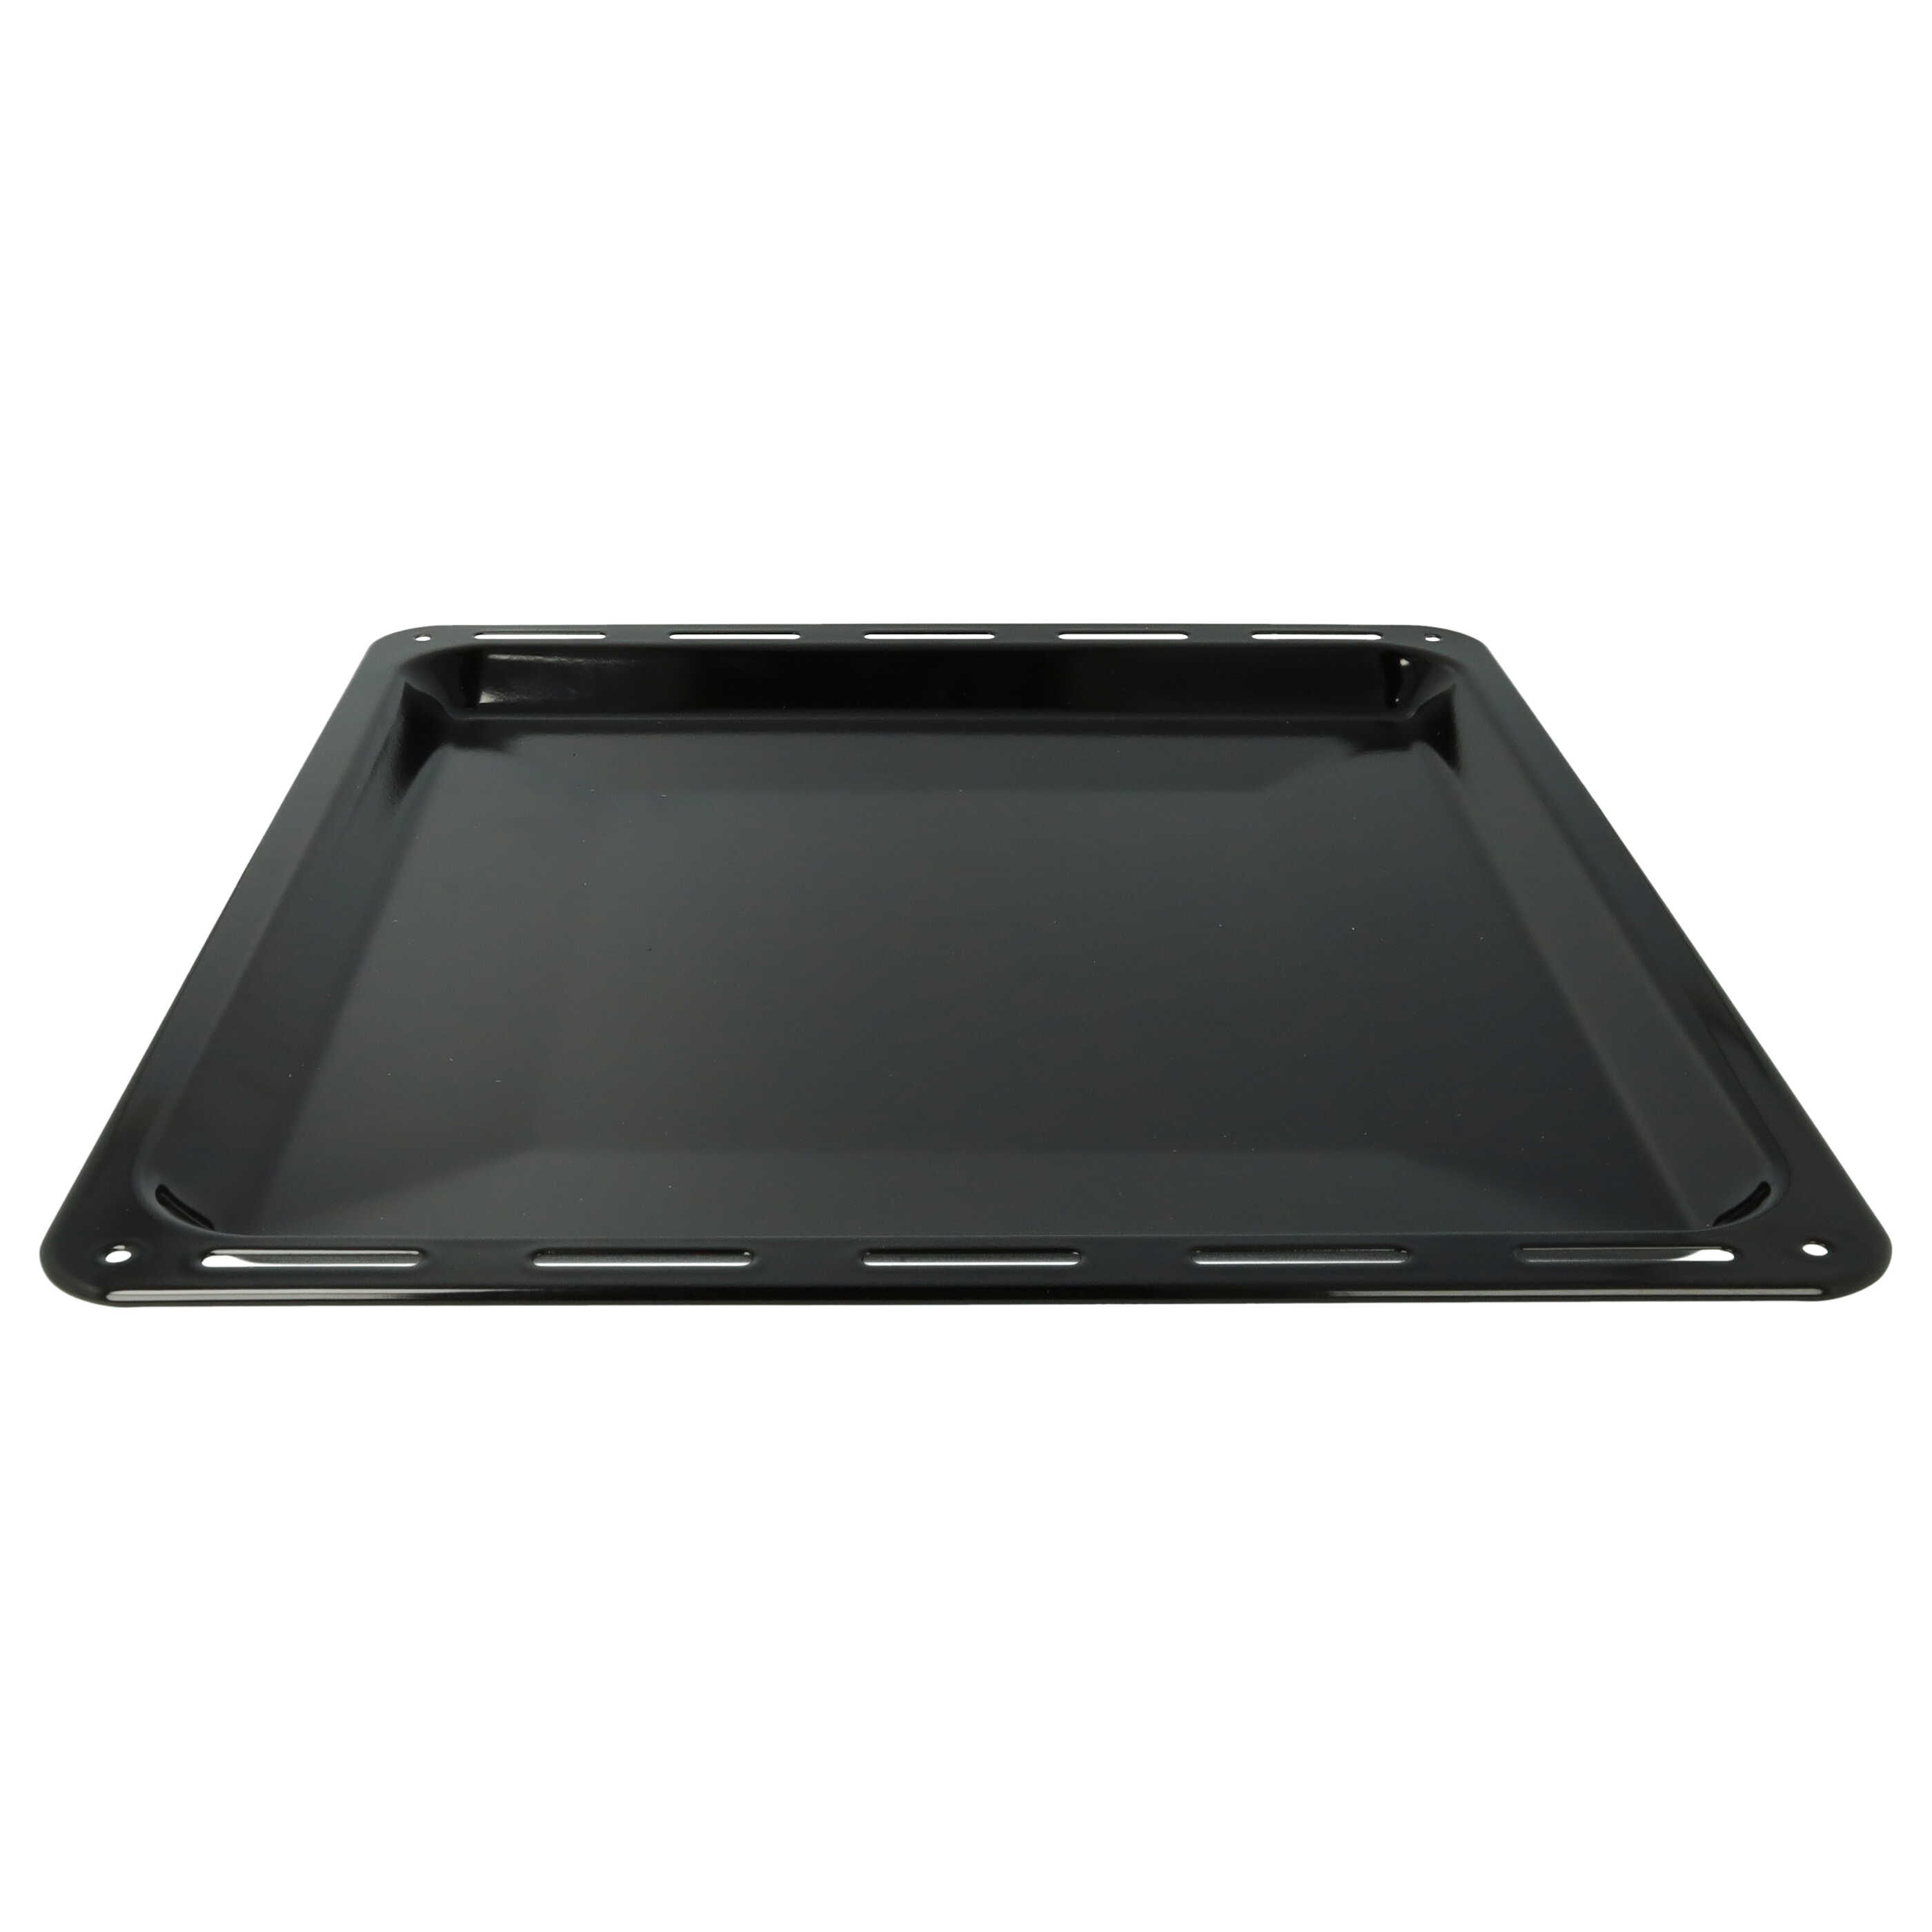 Baking Tray as Replacement for AEG 3423981020 Oven - 42.2 x 37.6 x 2 cm, Non-stick coating, Enamelled Black